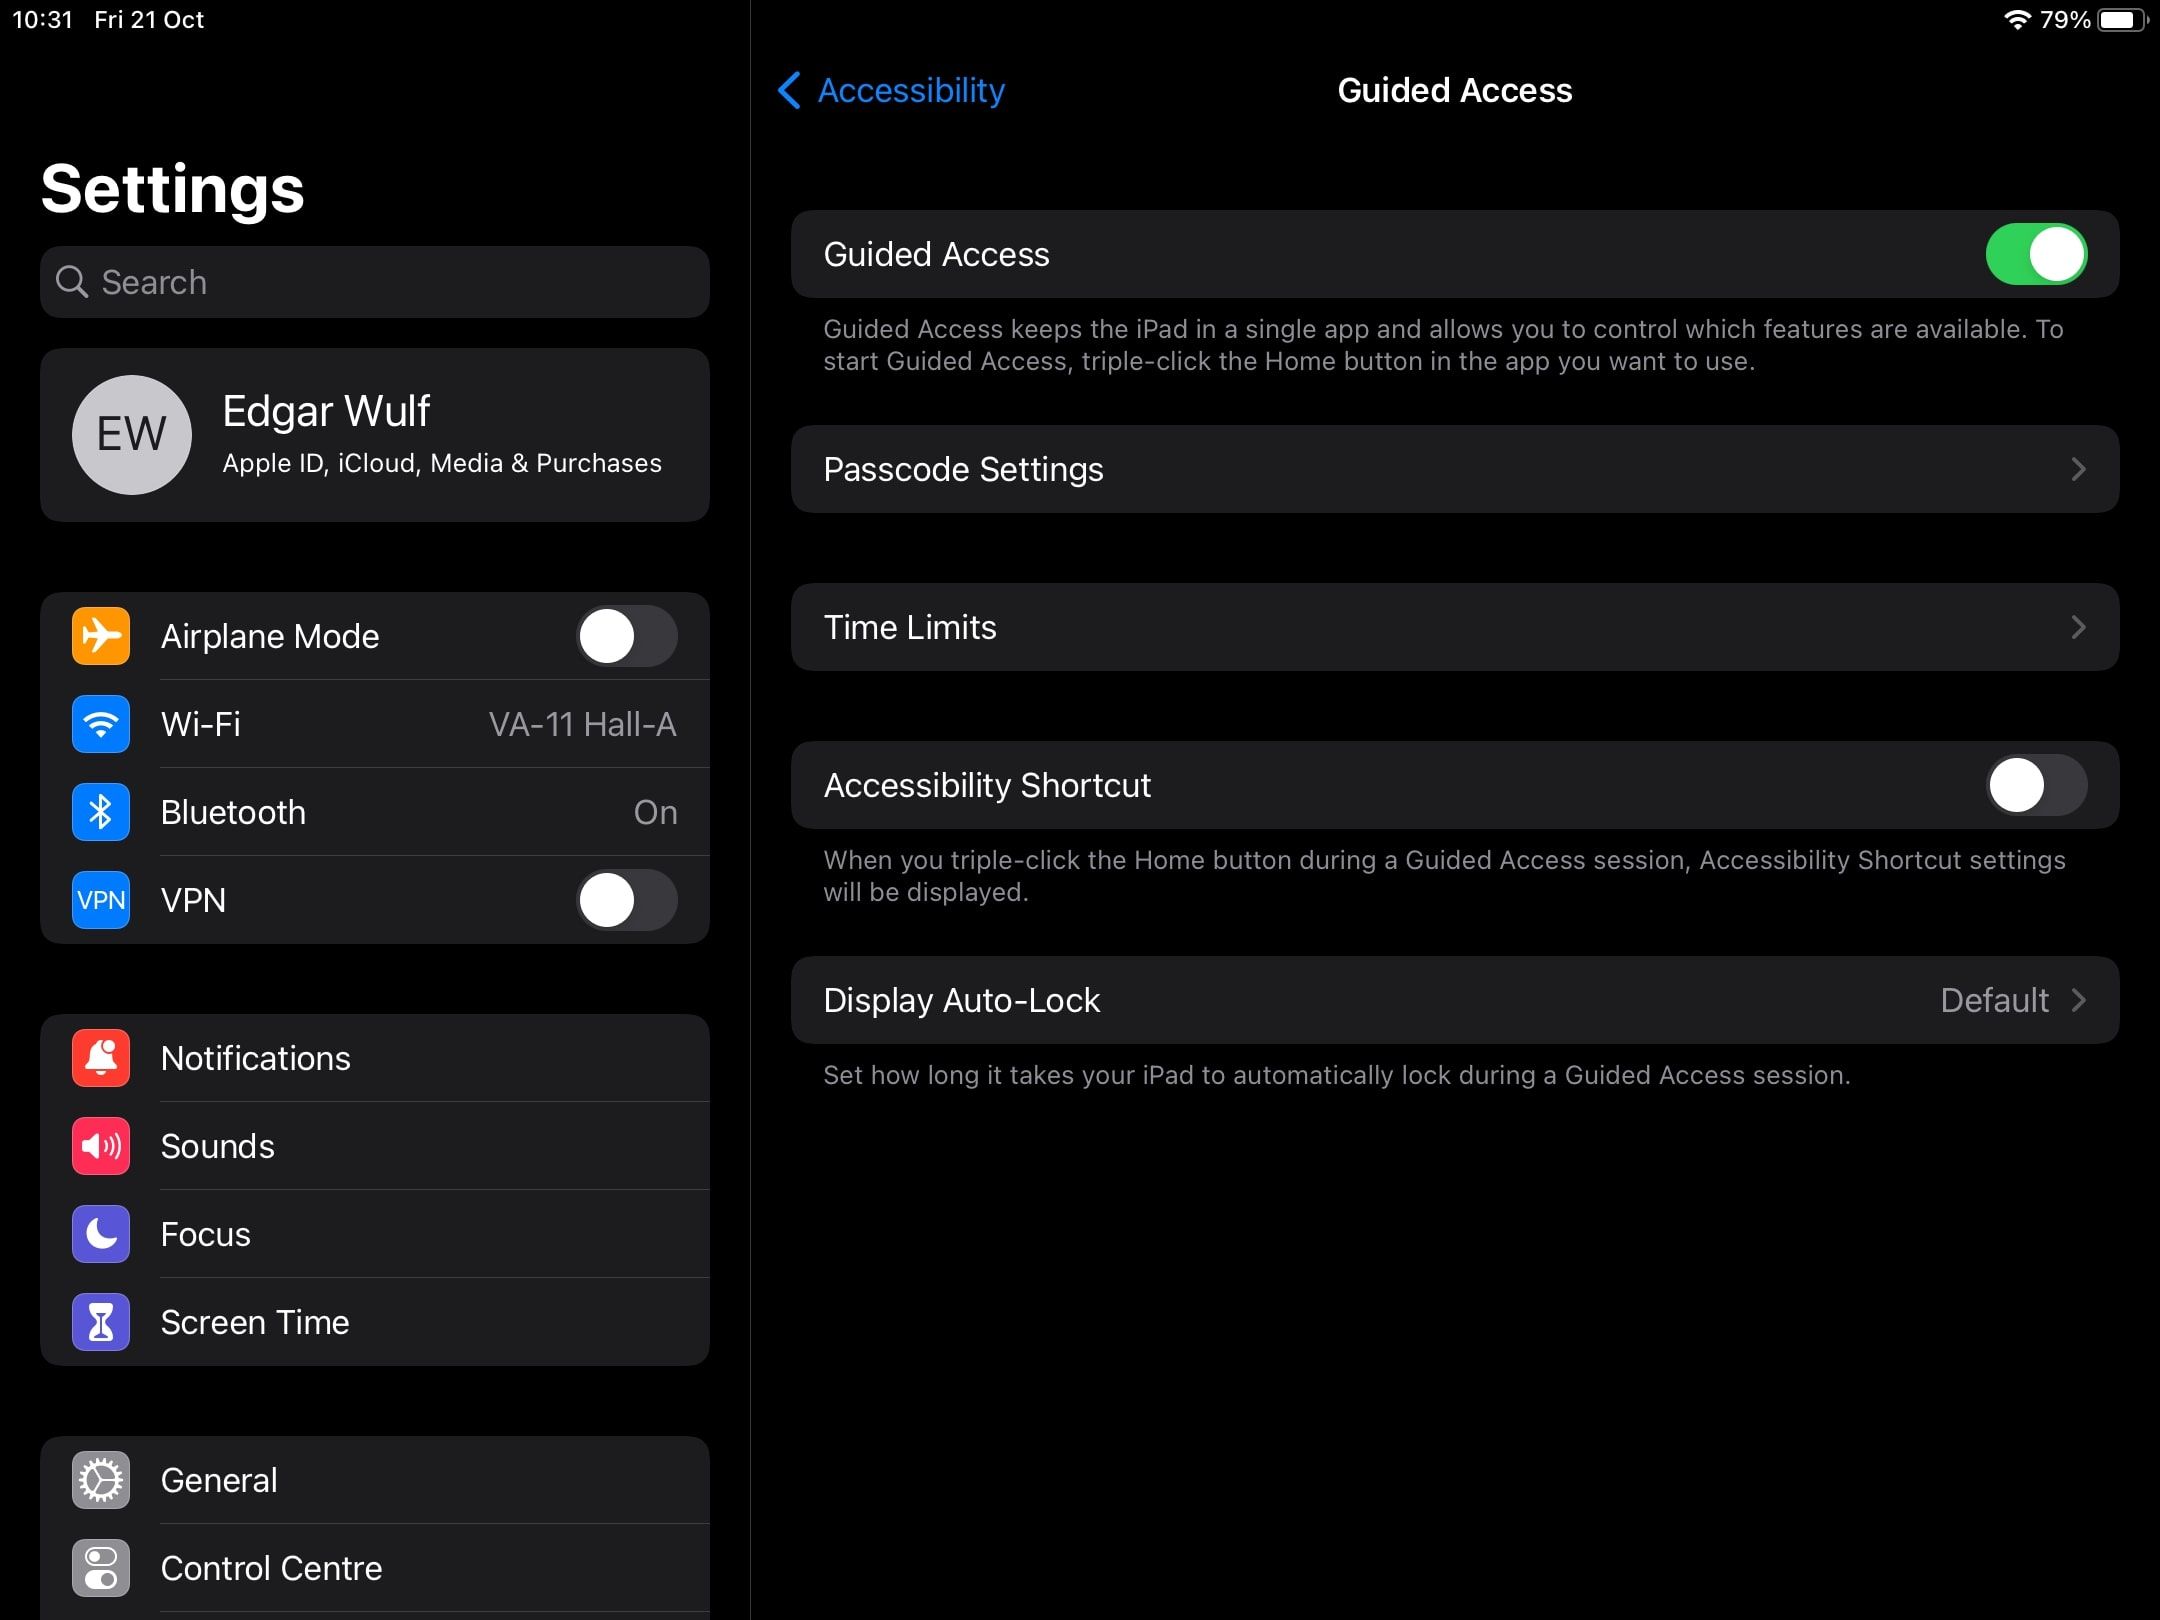 The iOS Guided Access accessibility features